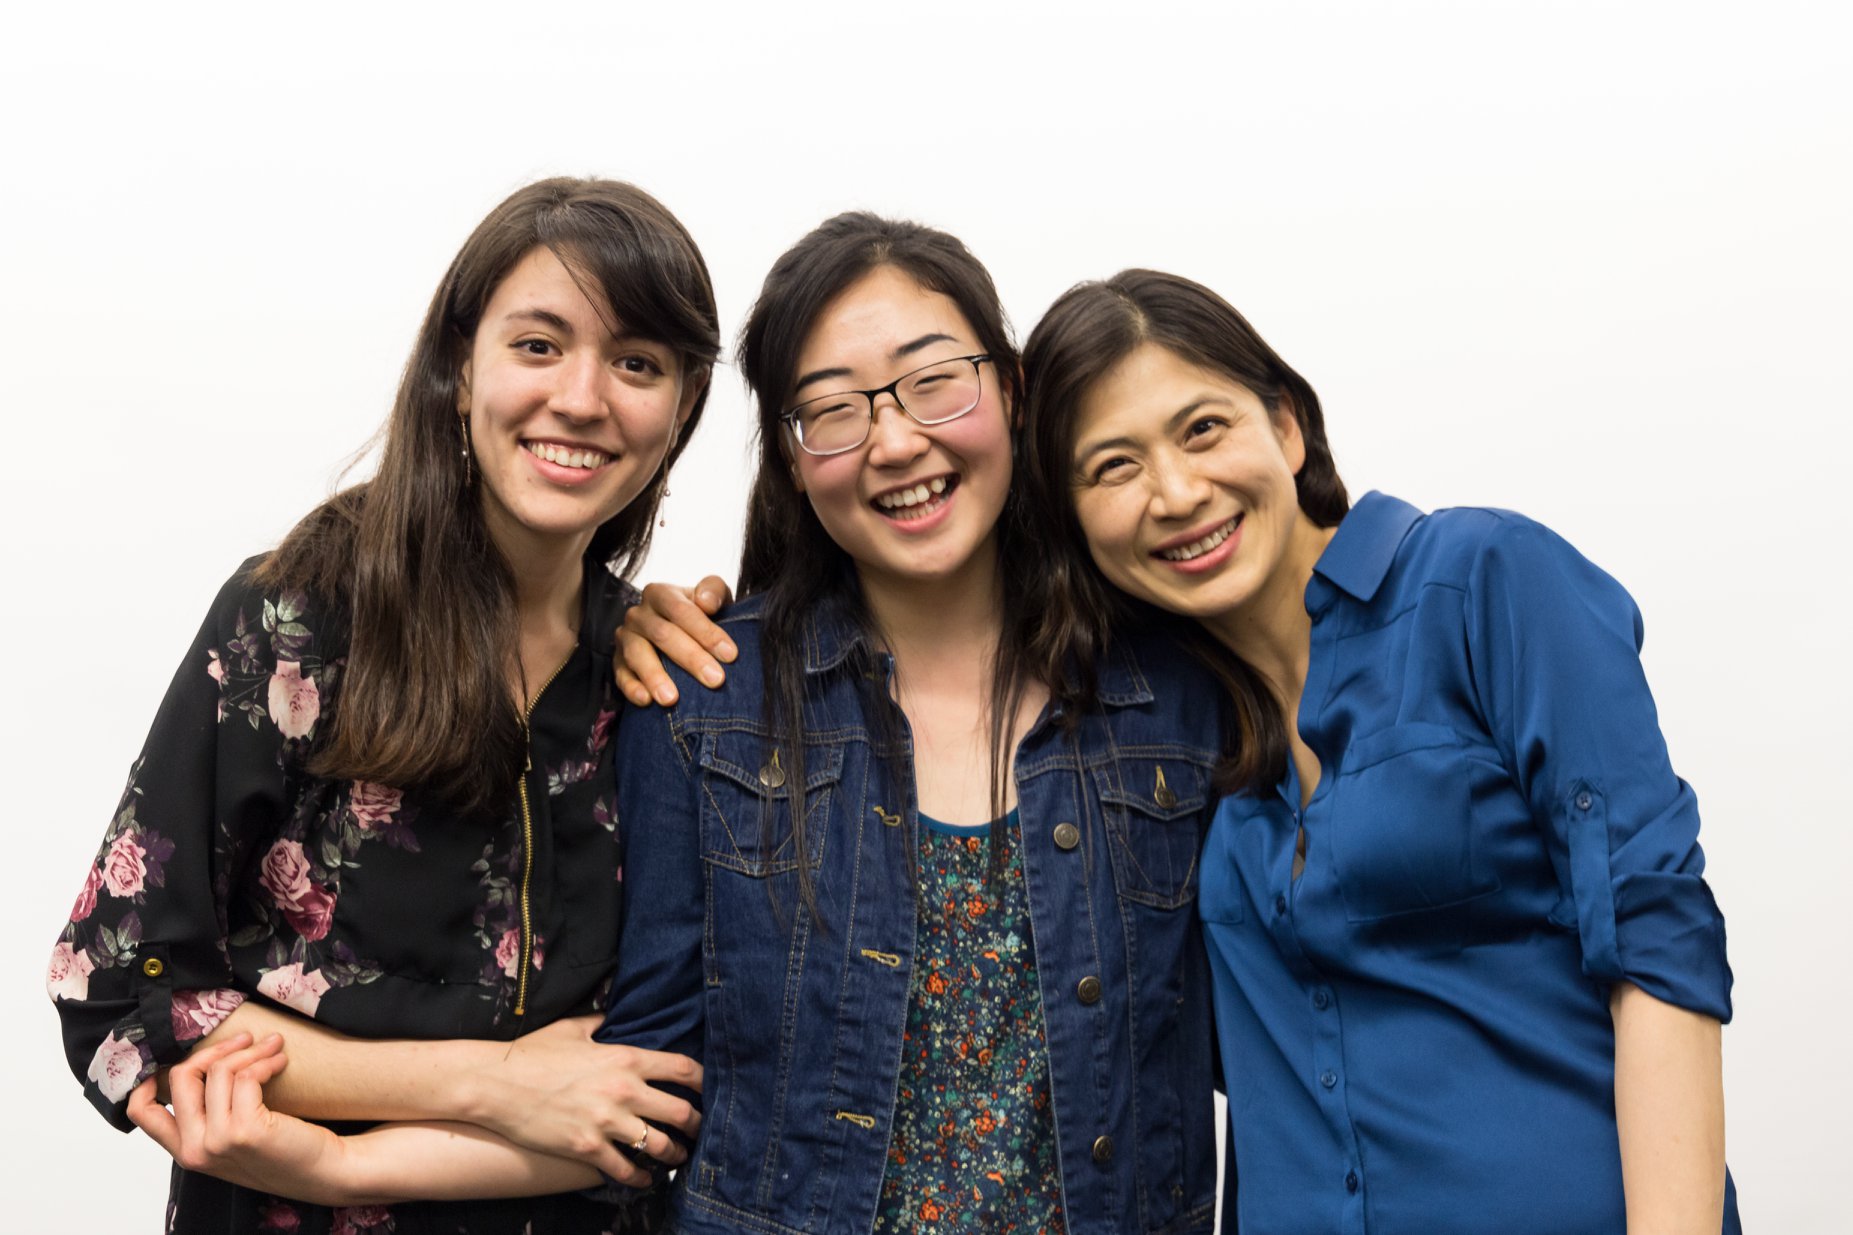 Three women smiling together at the camera